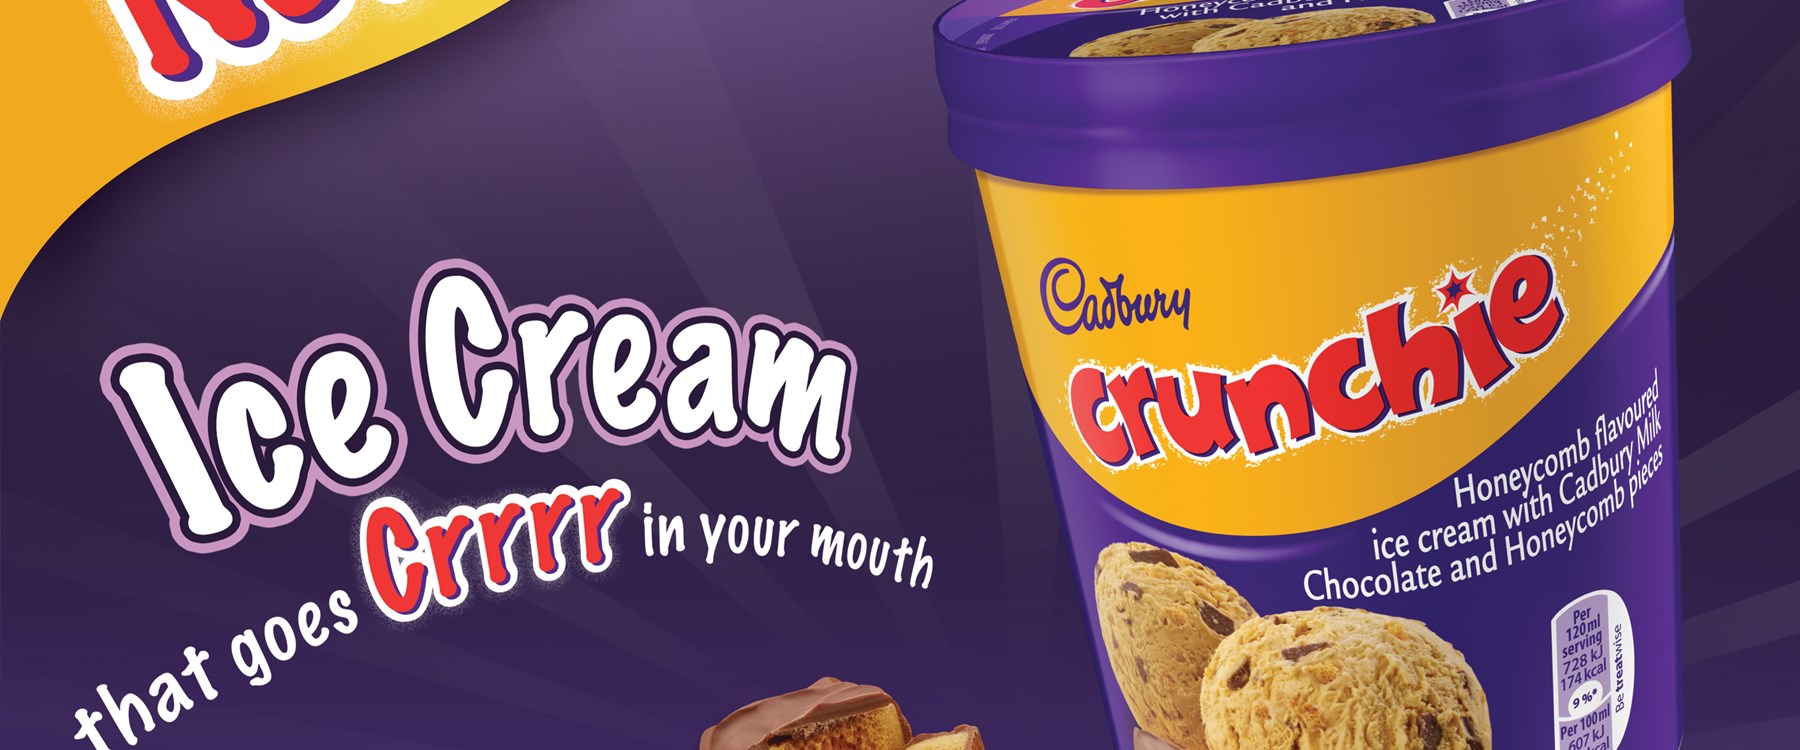 Crunchie - Ice Cream that goes GRRRR in you rmouth